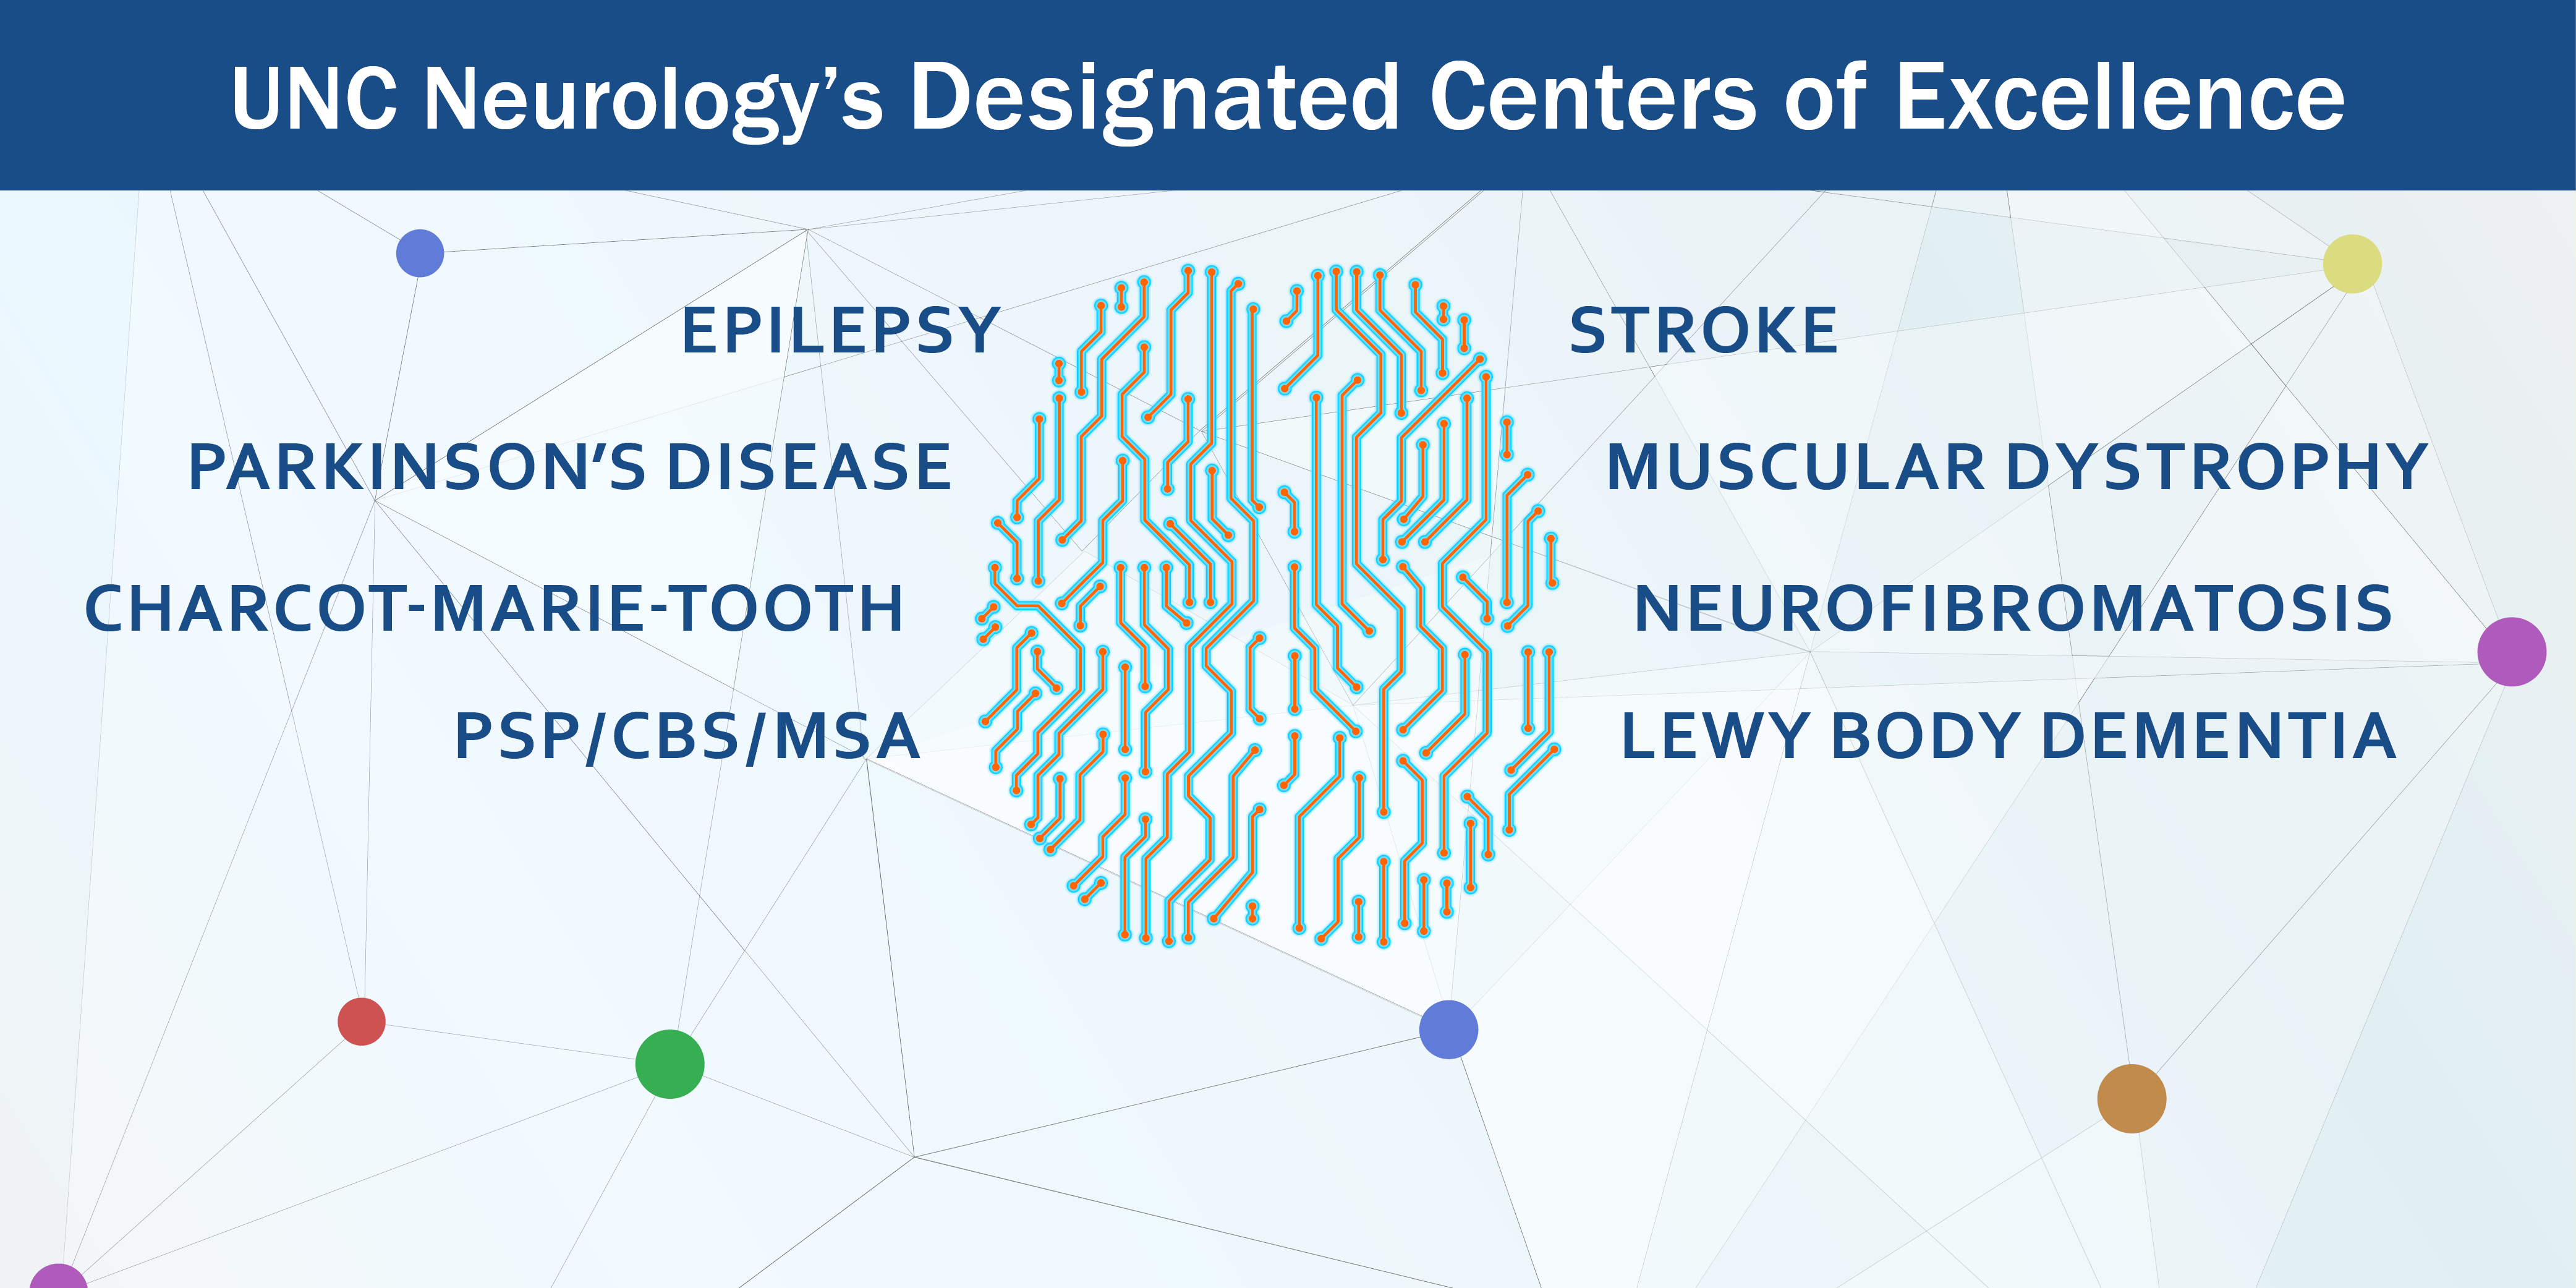 UNC Neurology's Designated Centers of Excellence includes epilepsy, Parkinson's disease, Charcot-Marie-Tooth, PSP, stroke, muscular dystrophy, neurofibromatosis, Lewy Body dementia 